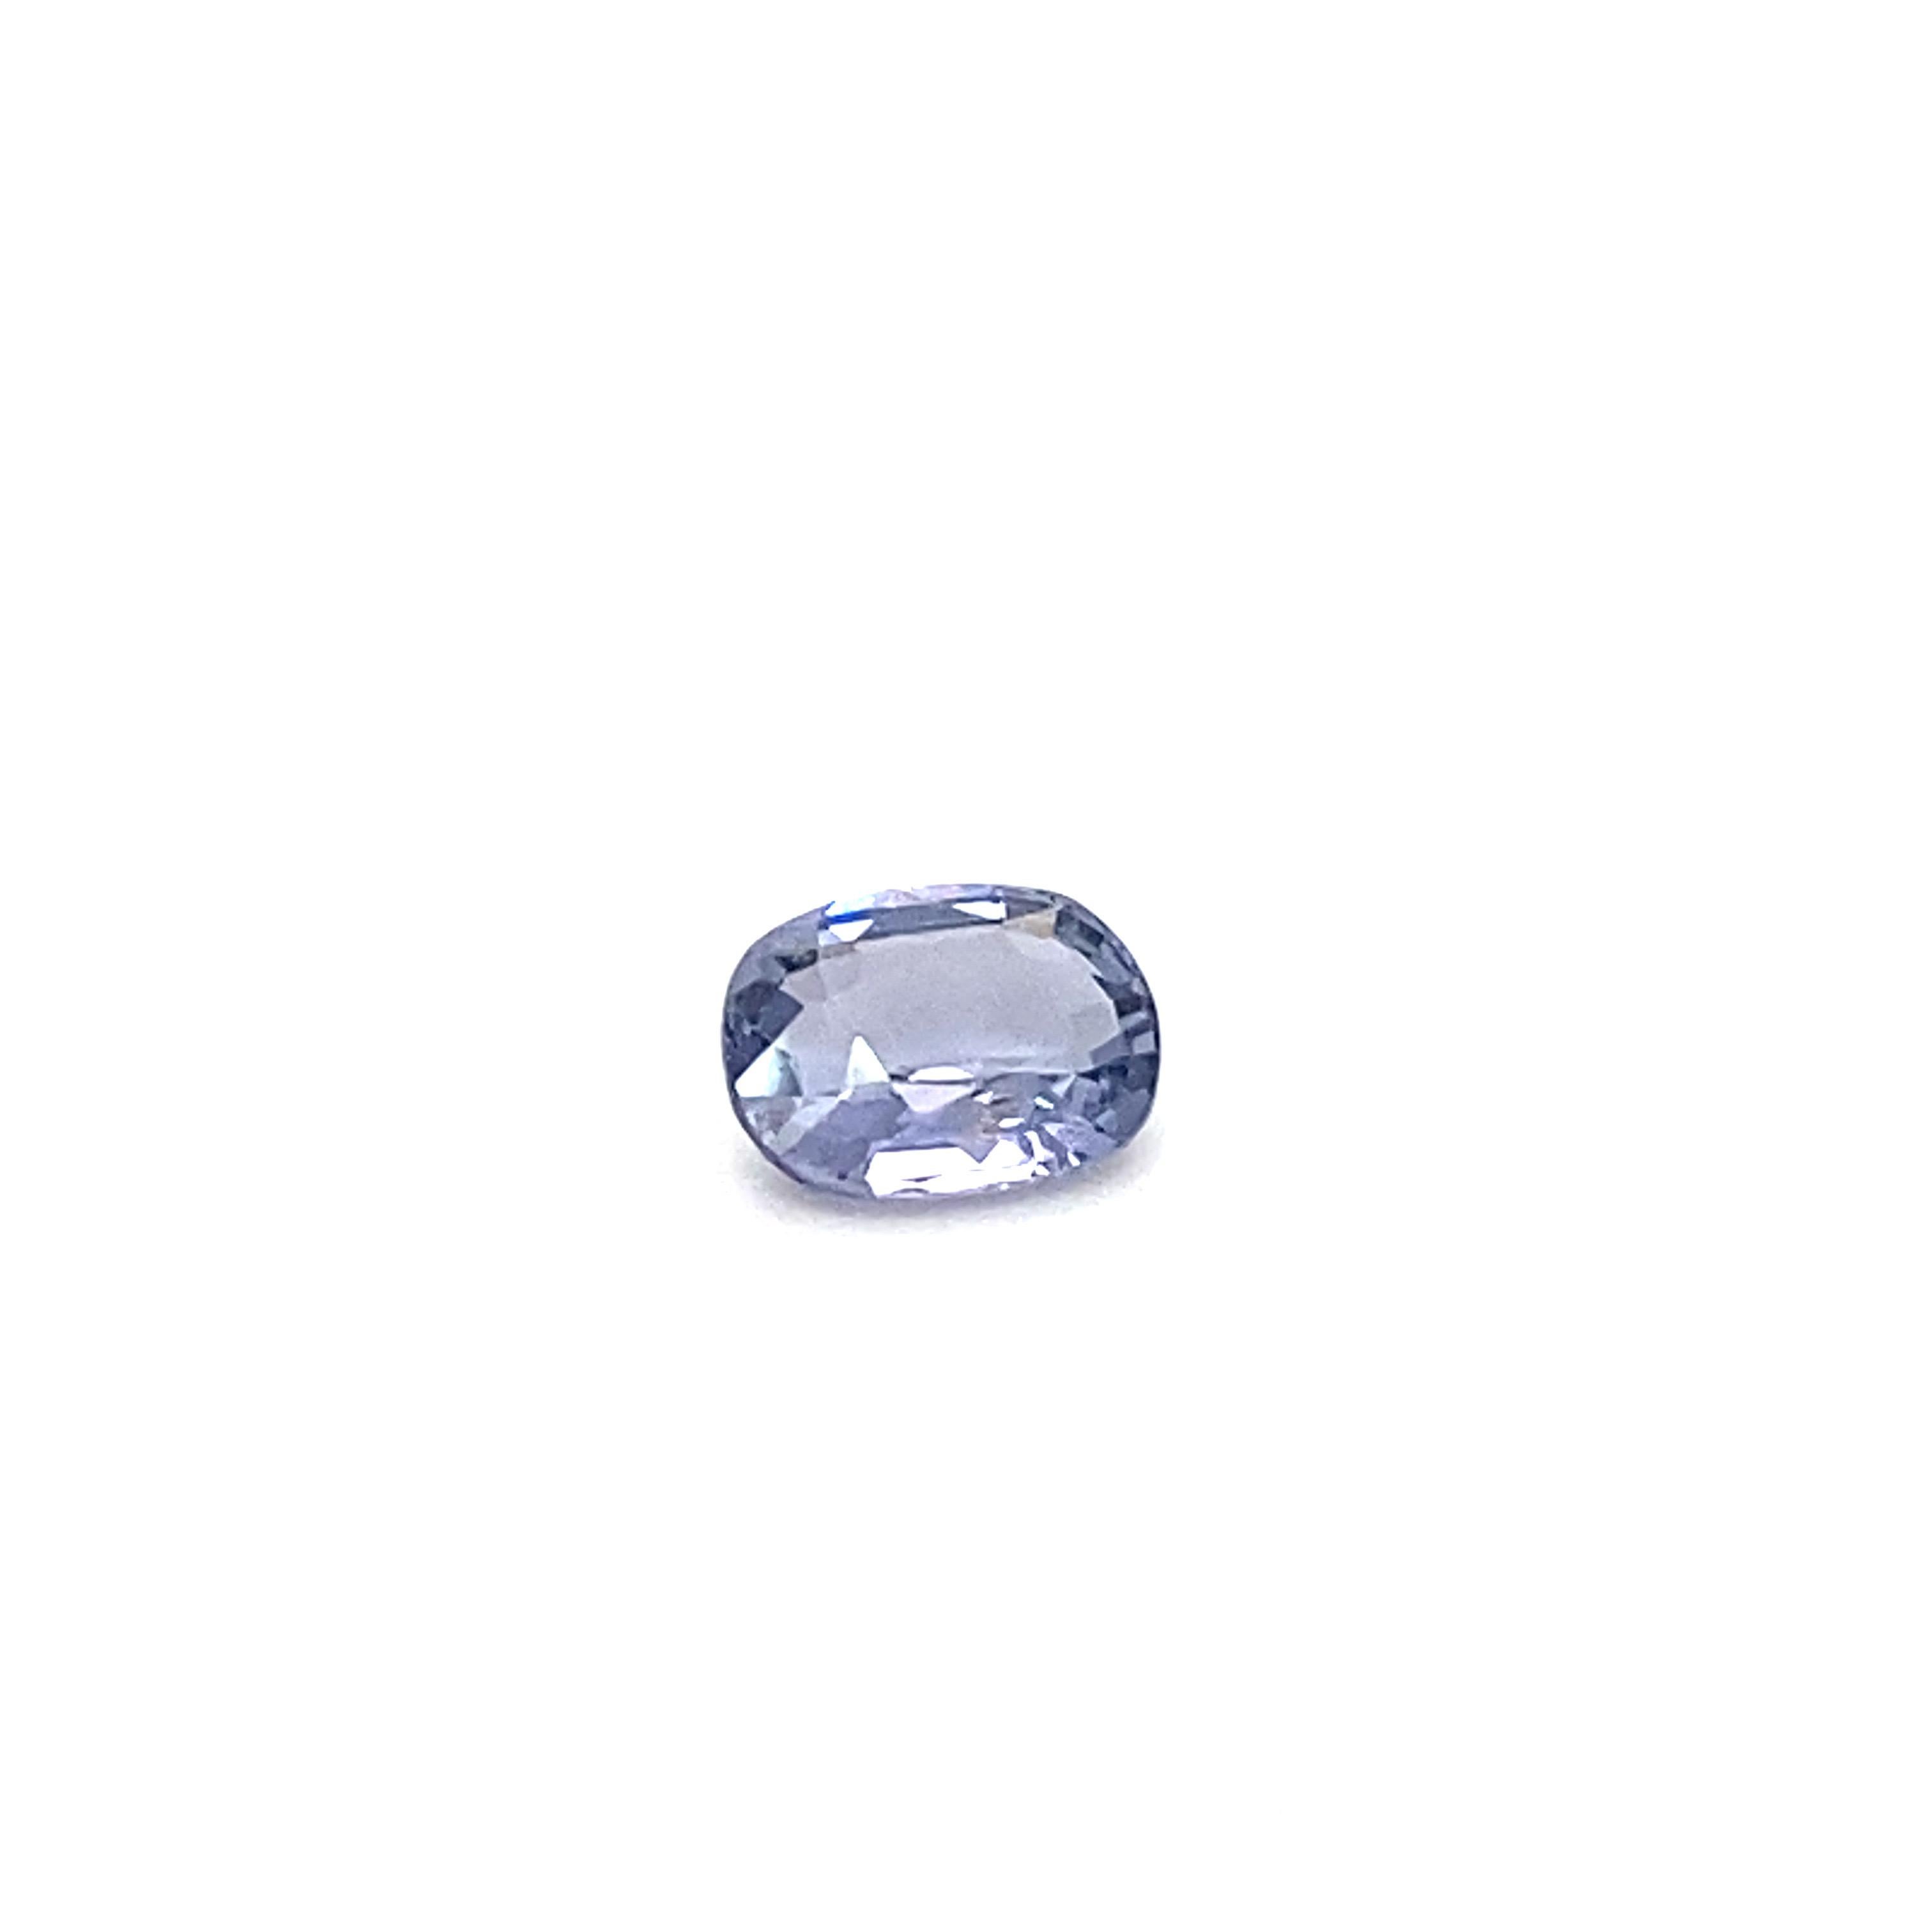 This 1.6 carat oval shape natural violet spinel loose gemstone is carefully hand cut and hand polished by skilled artisans. This lustrous loose gemstone can be created into any stunning piece of jewelry according to your choice.
Spinel is the birth